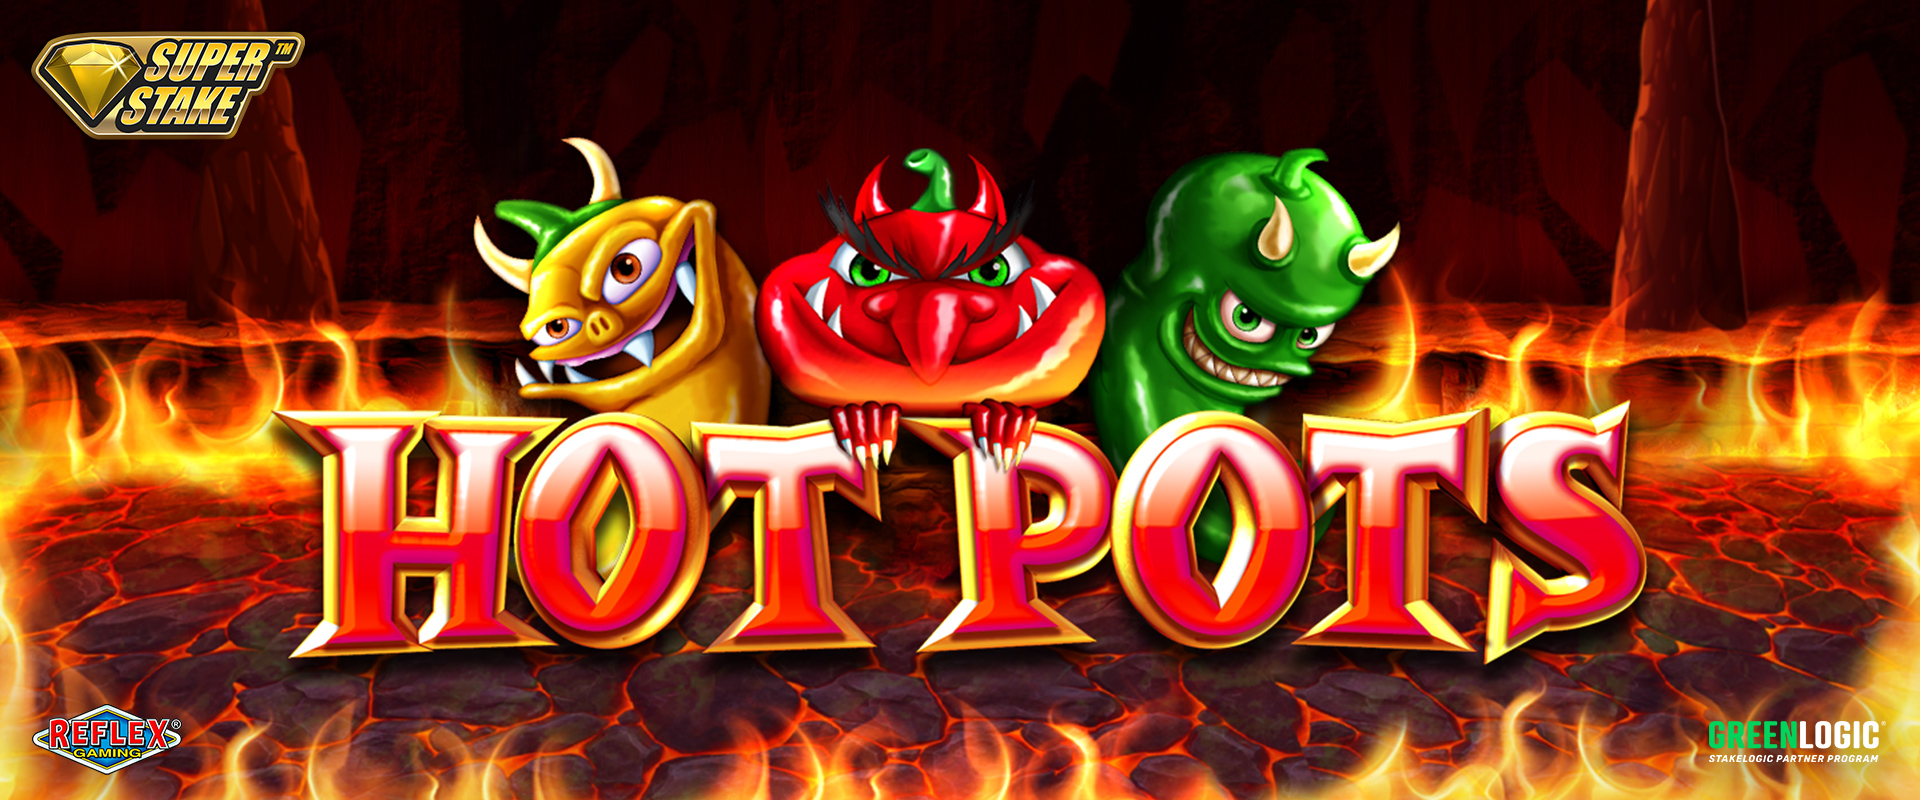 Stakelogic and Reflex Gaming turn up the heat with new Hot Pots slot